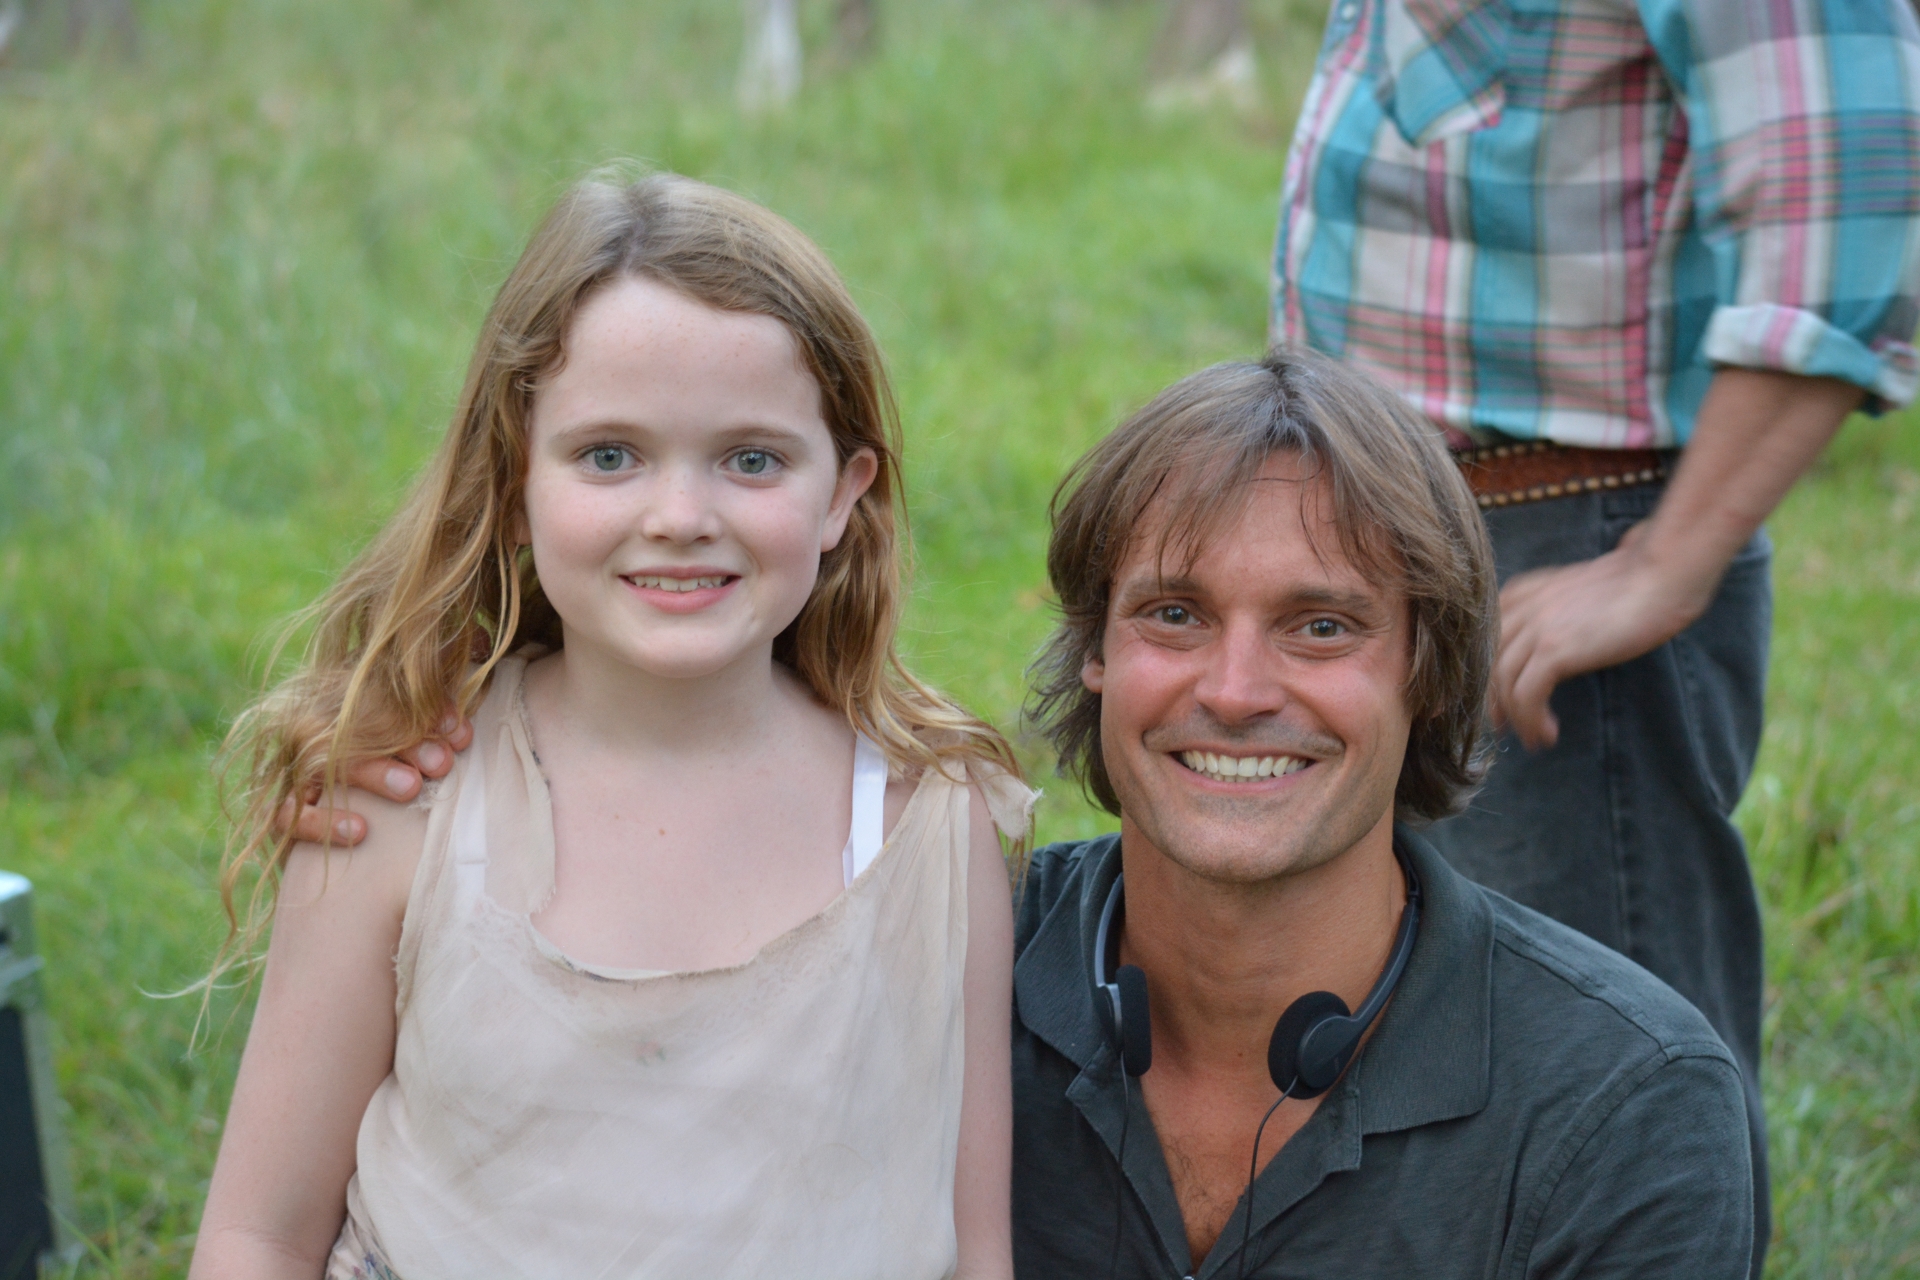 Teagan with Scott Rice, director of 'My Monster'.